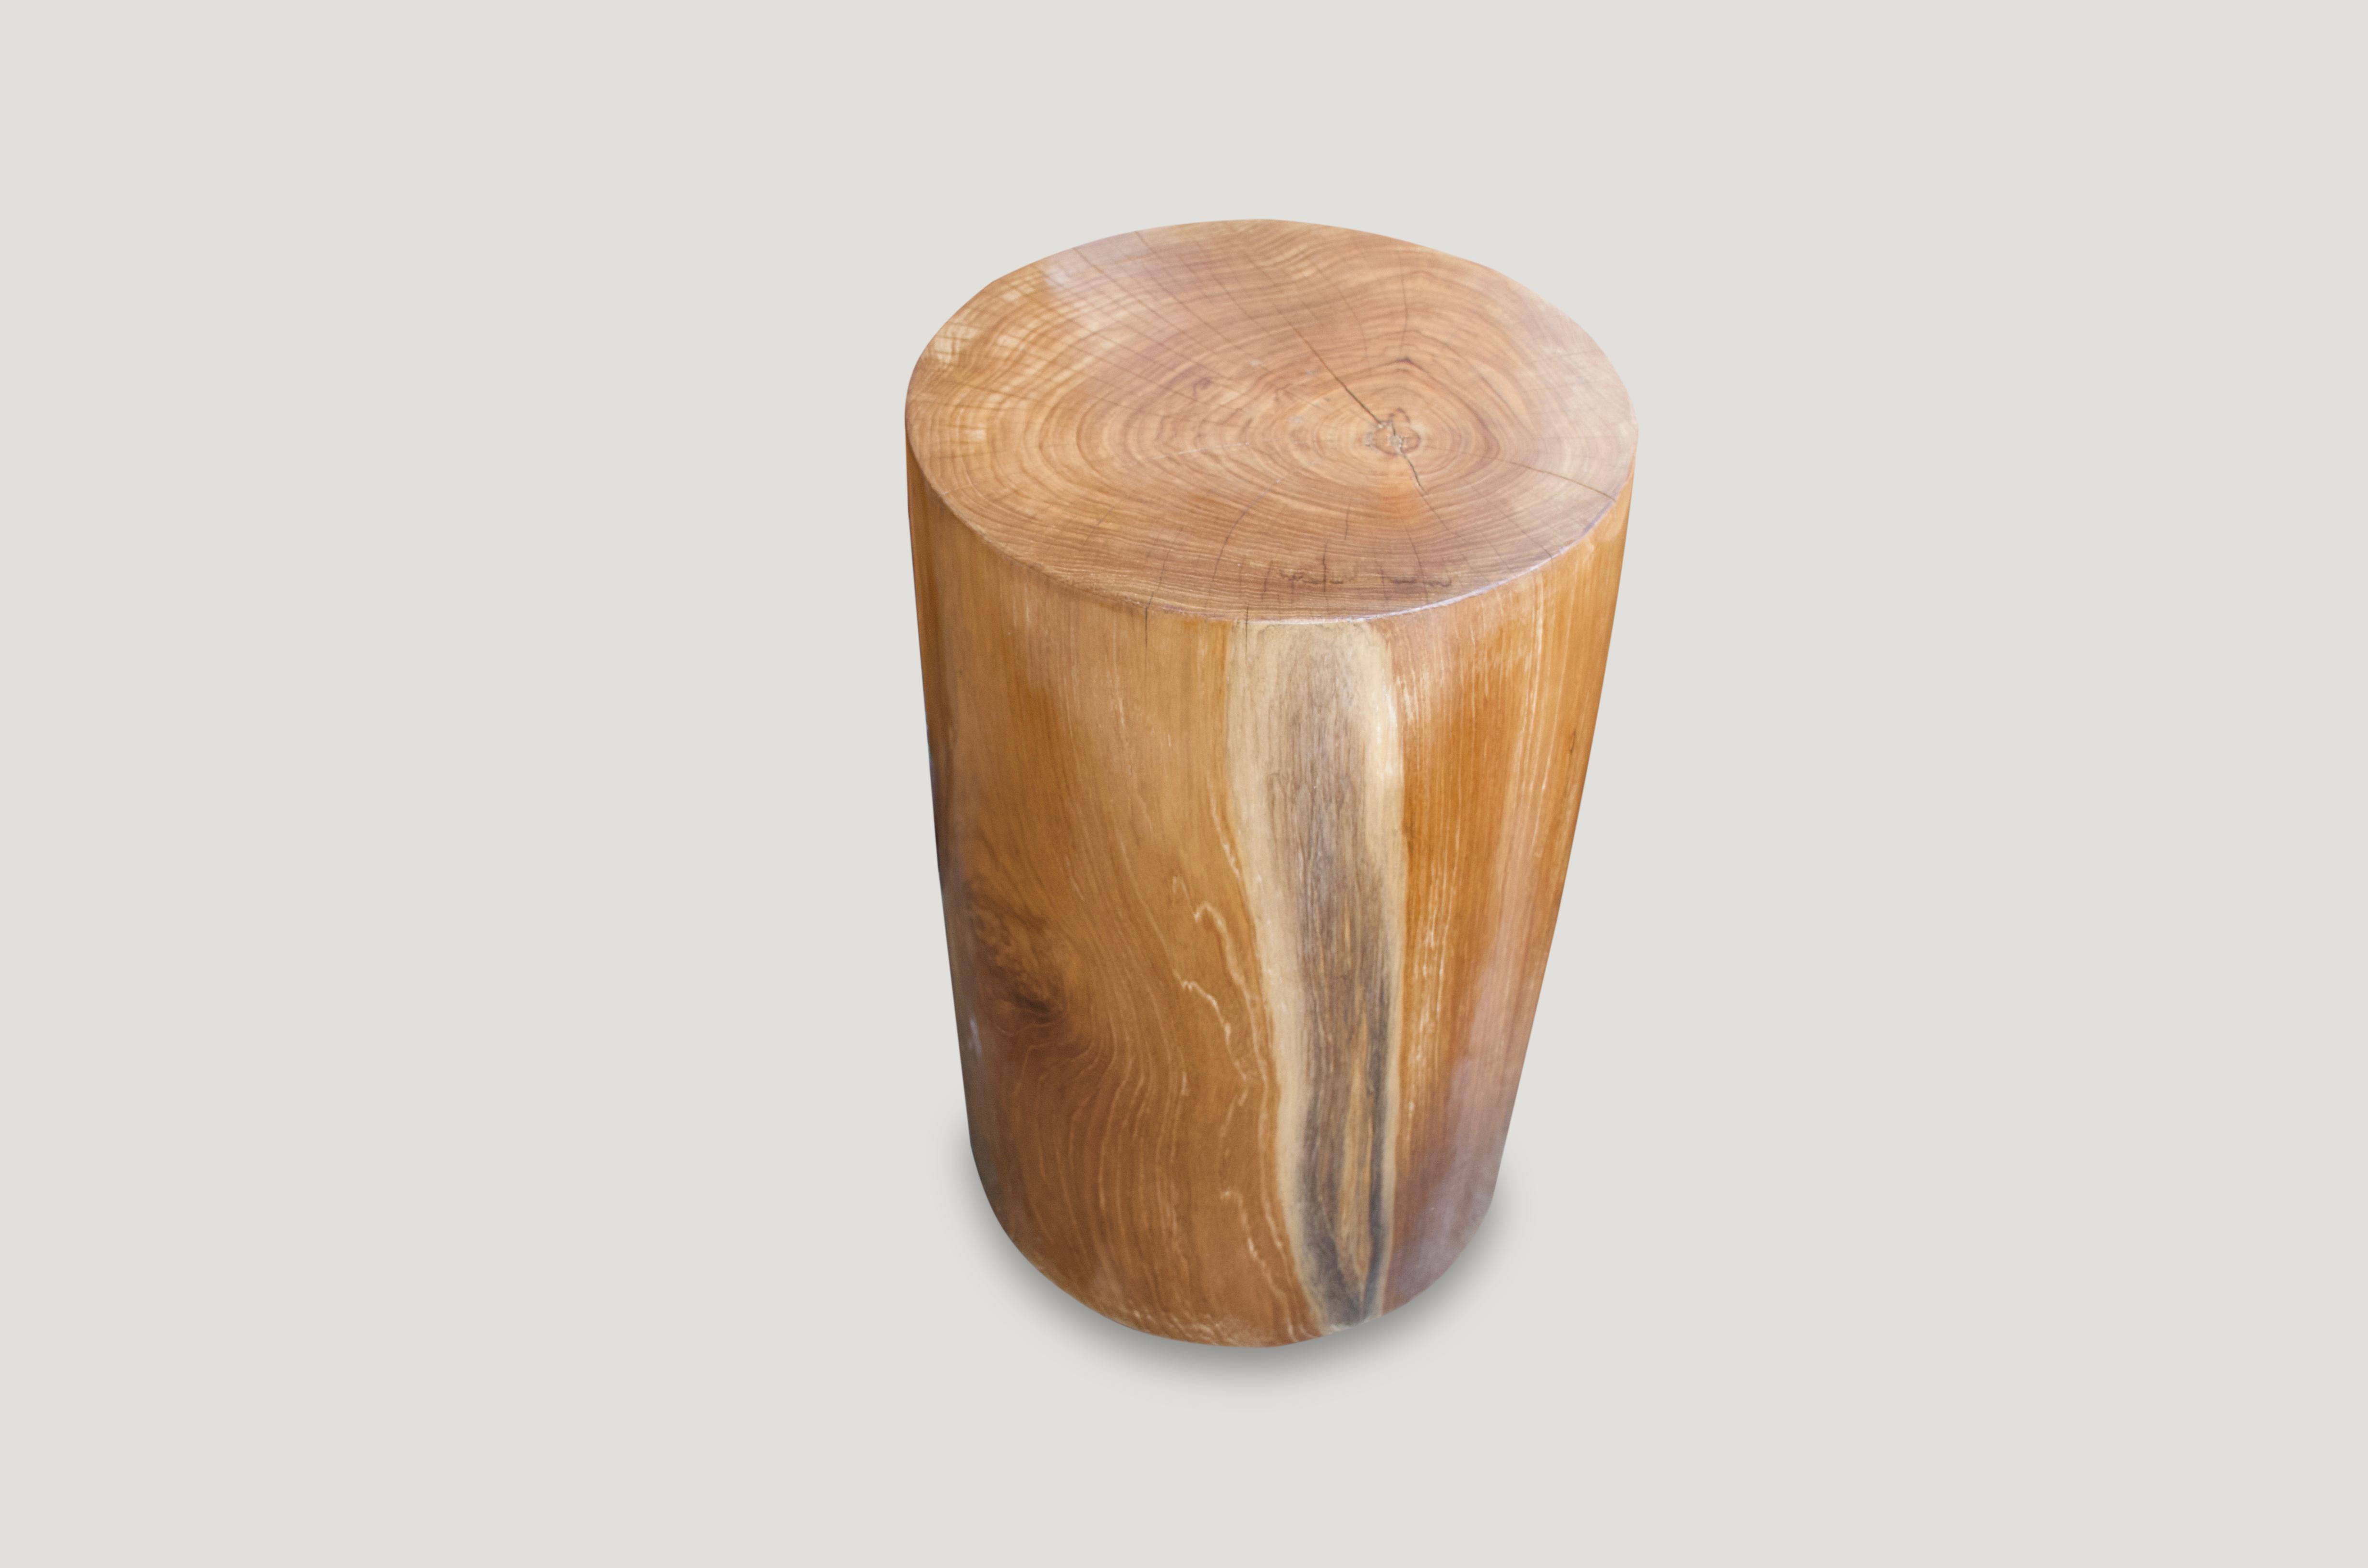 Reclaimed teak wood pedestal with a natural oil finish.

Andrianna Shamaris. The Leader In Modern Organic Design.